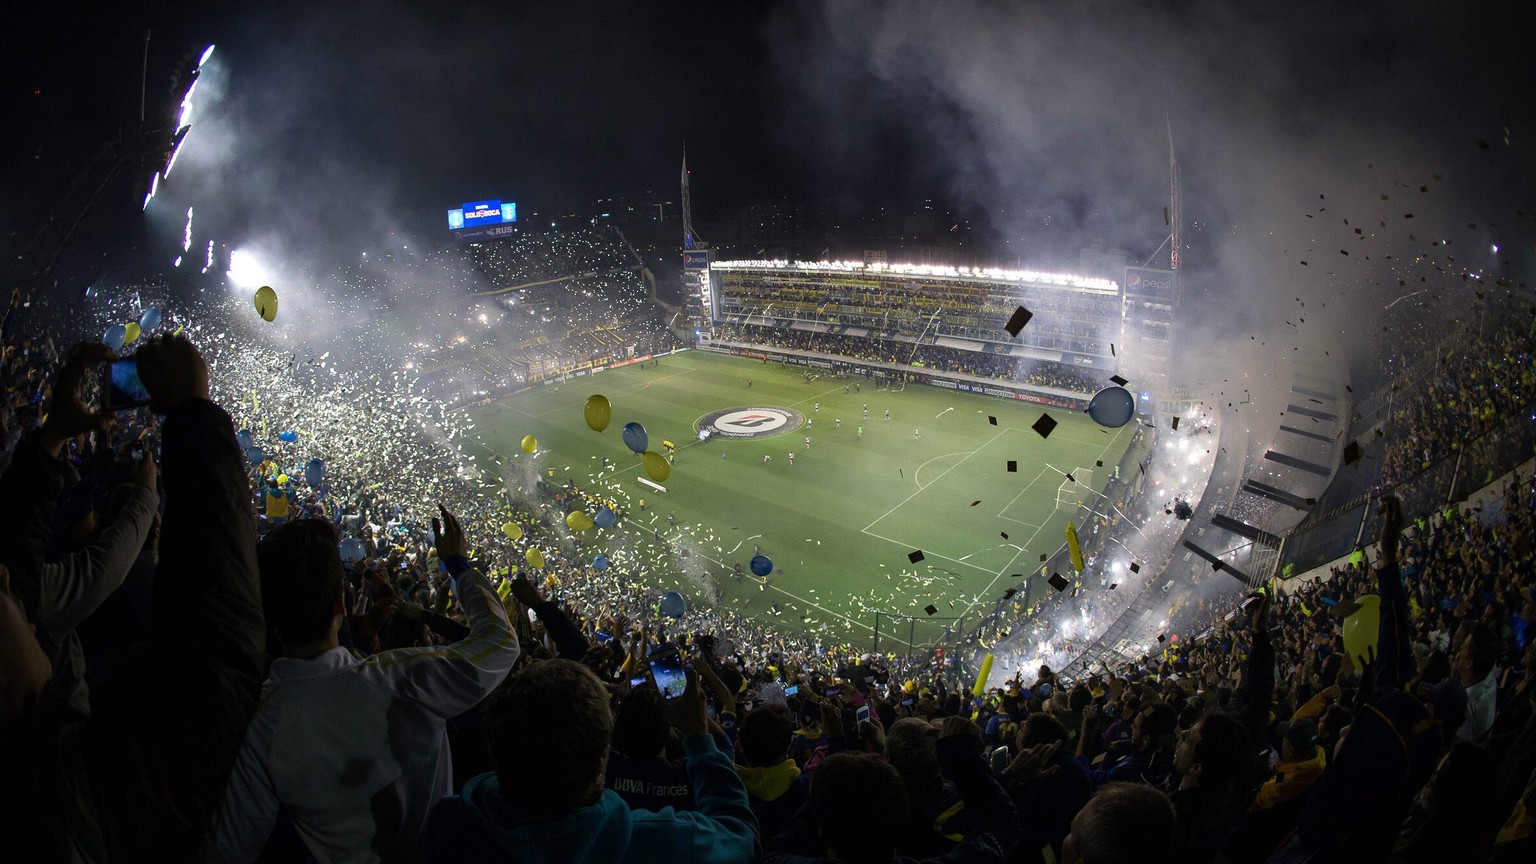 epa04749062 A view of the soccer field seen from the stands during the Libertadores Cup match between the Boca Juniors and River Plate at La Bombonera stadium in Buenos Aires, Argentina, 14 May 2015.  ...